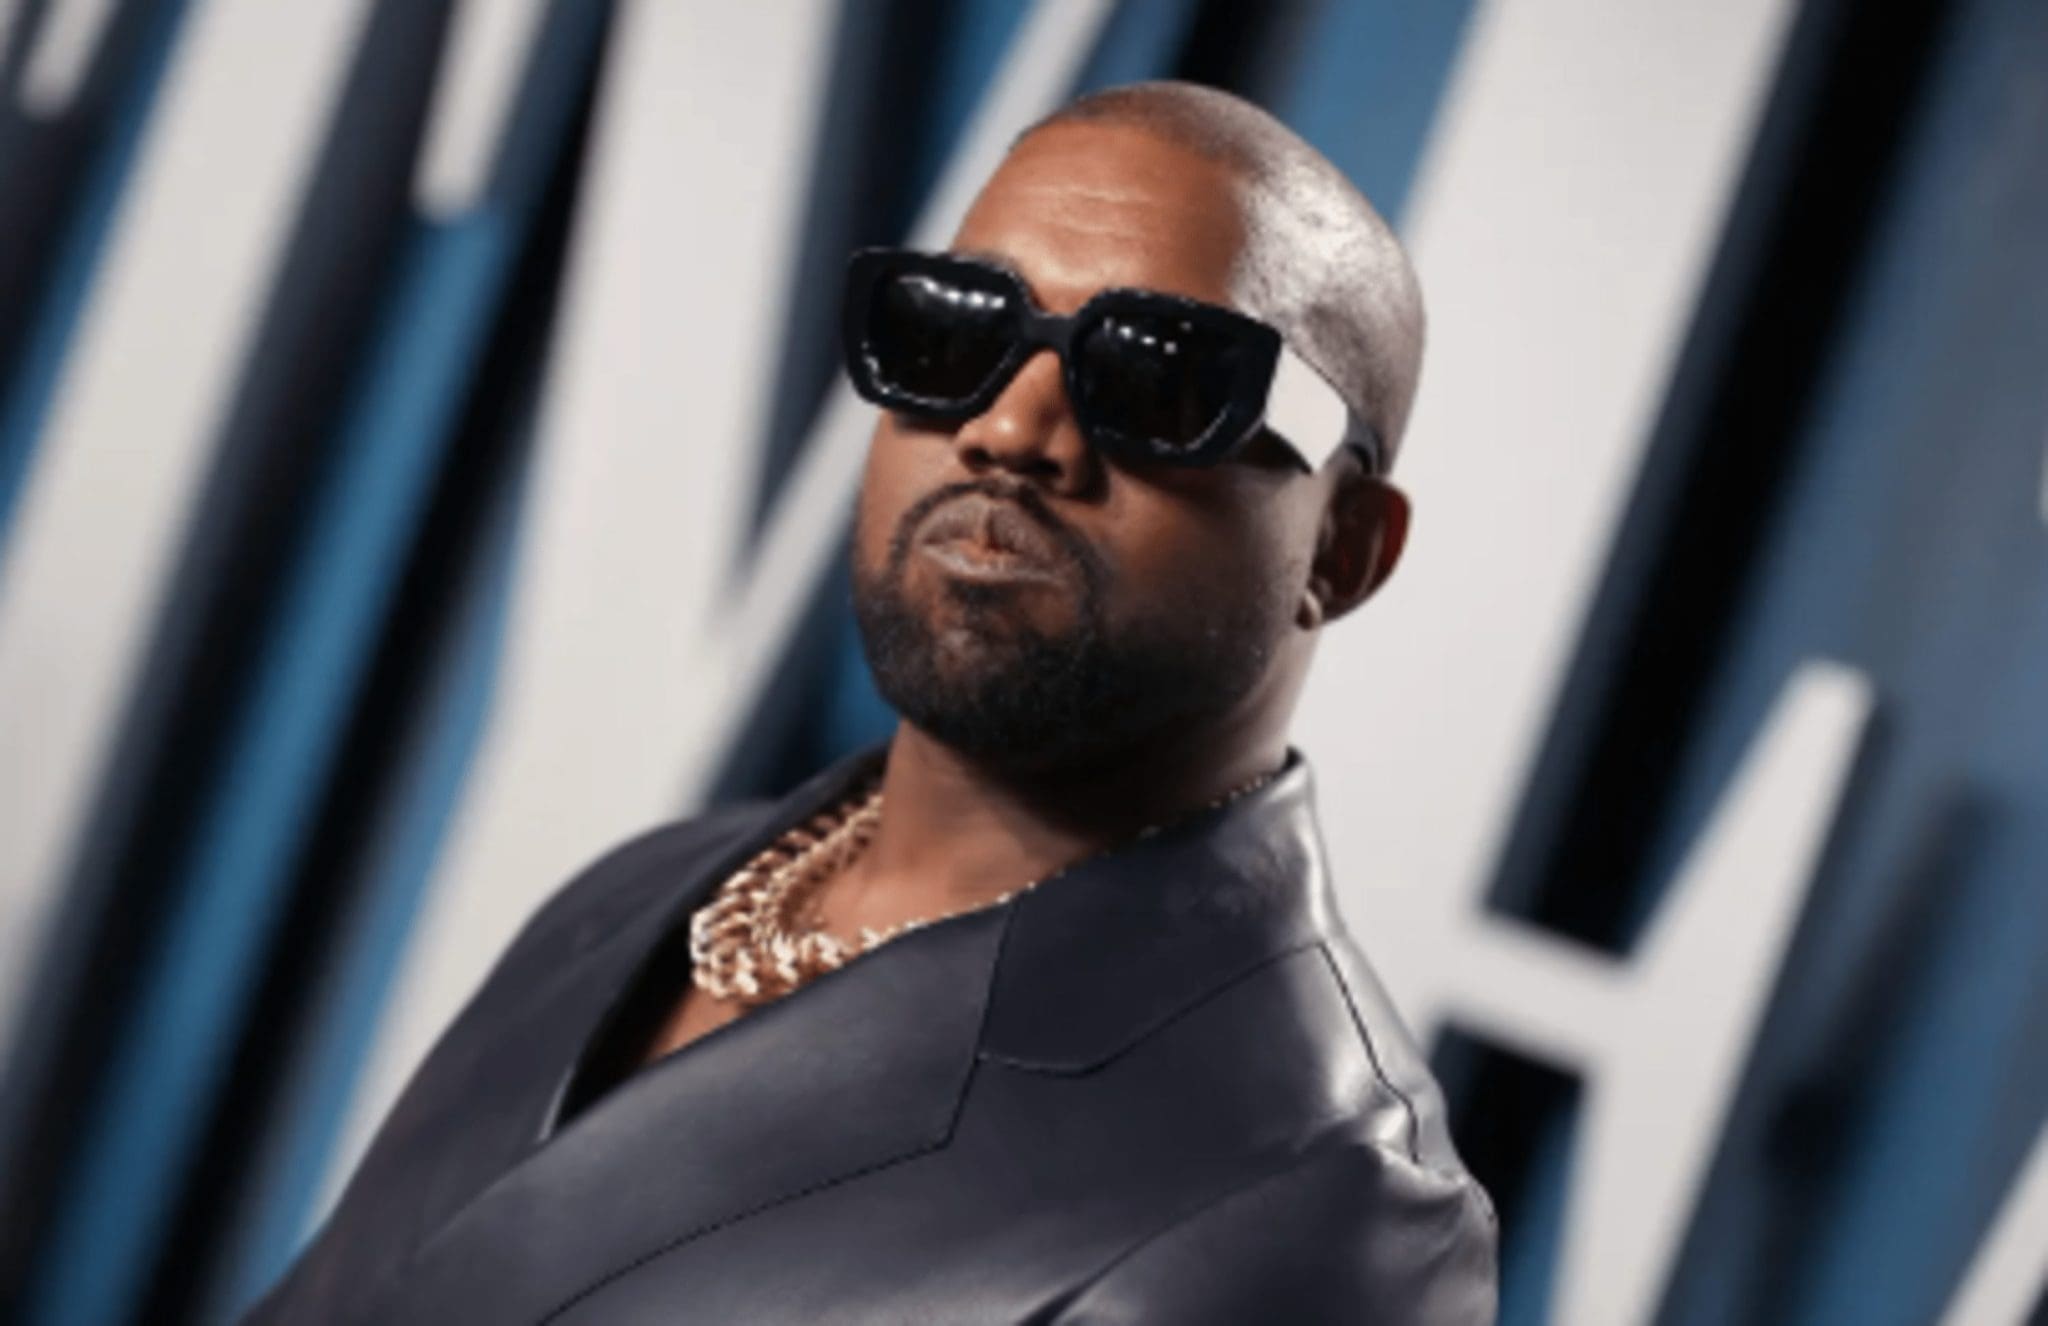 Kanye West insisted his tour would go on despite his anti-Semitic tweets.